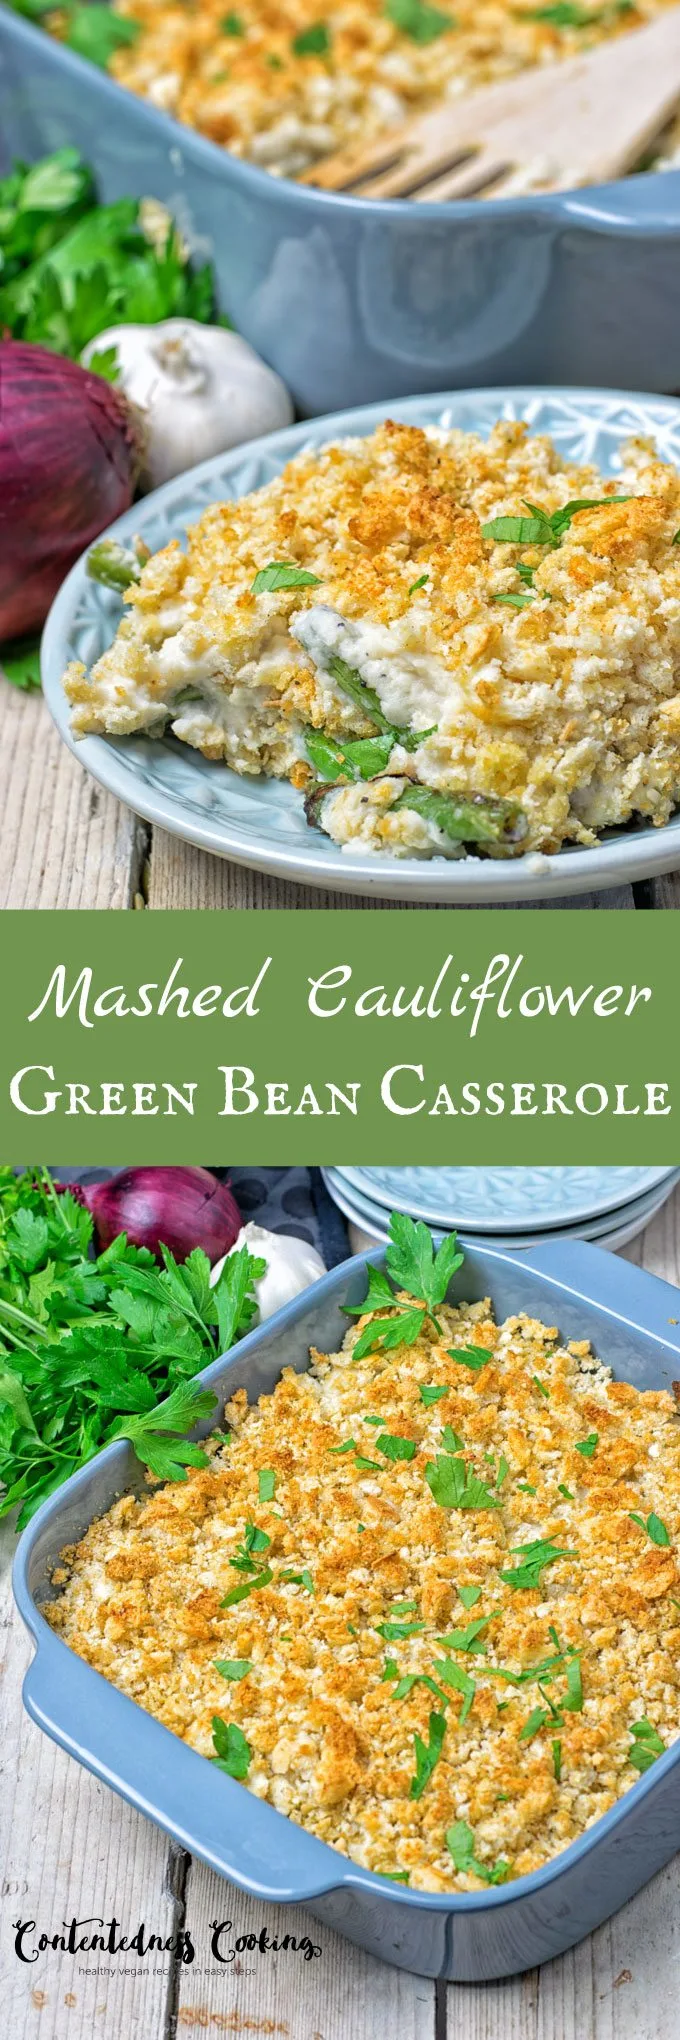 Collage of two pictures of the Mashed Cauliflower Green Bean Casserole with recipe title text.